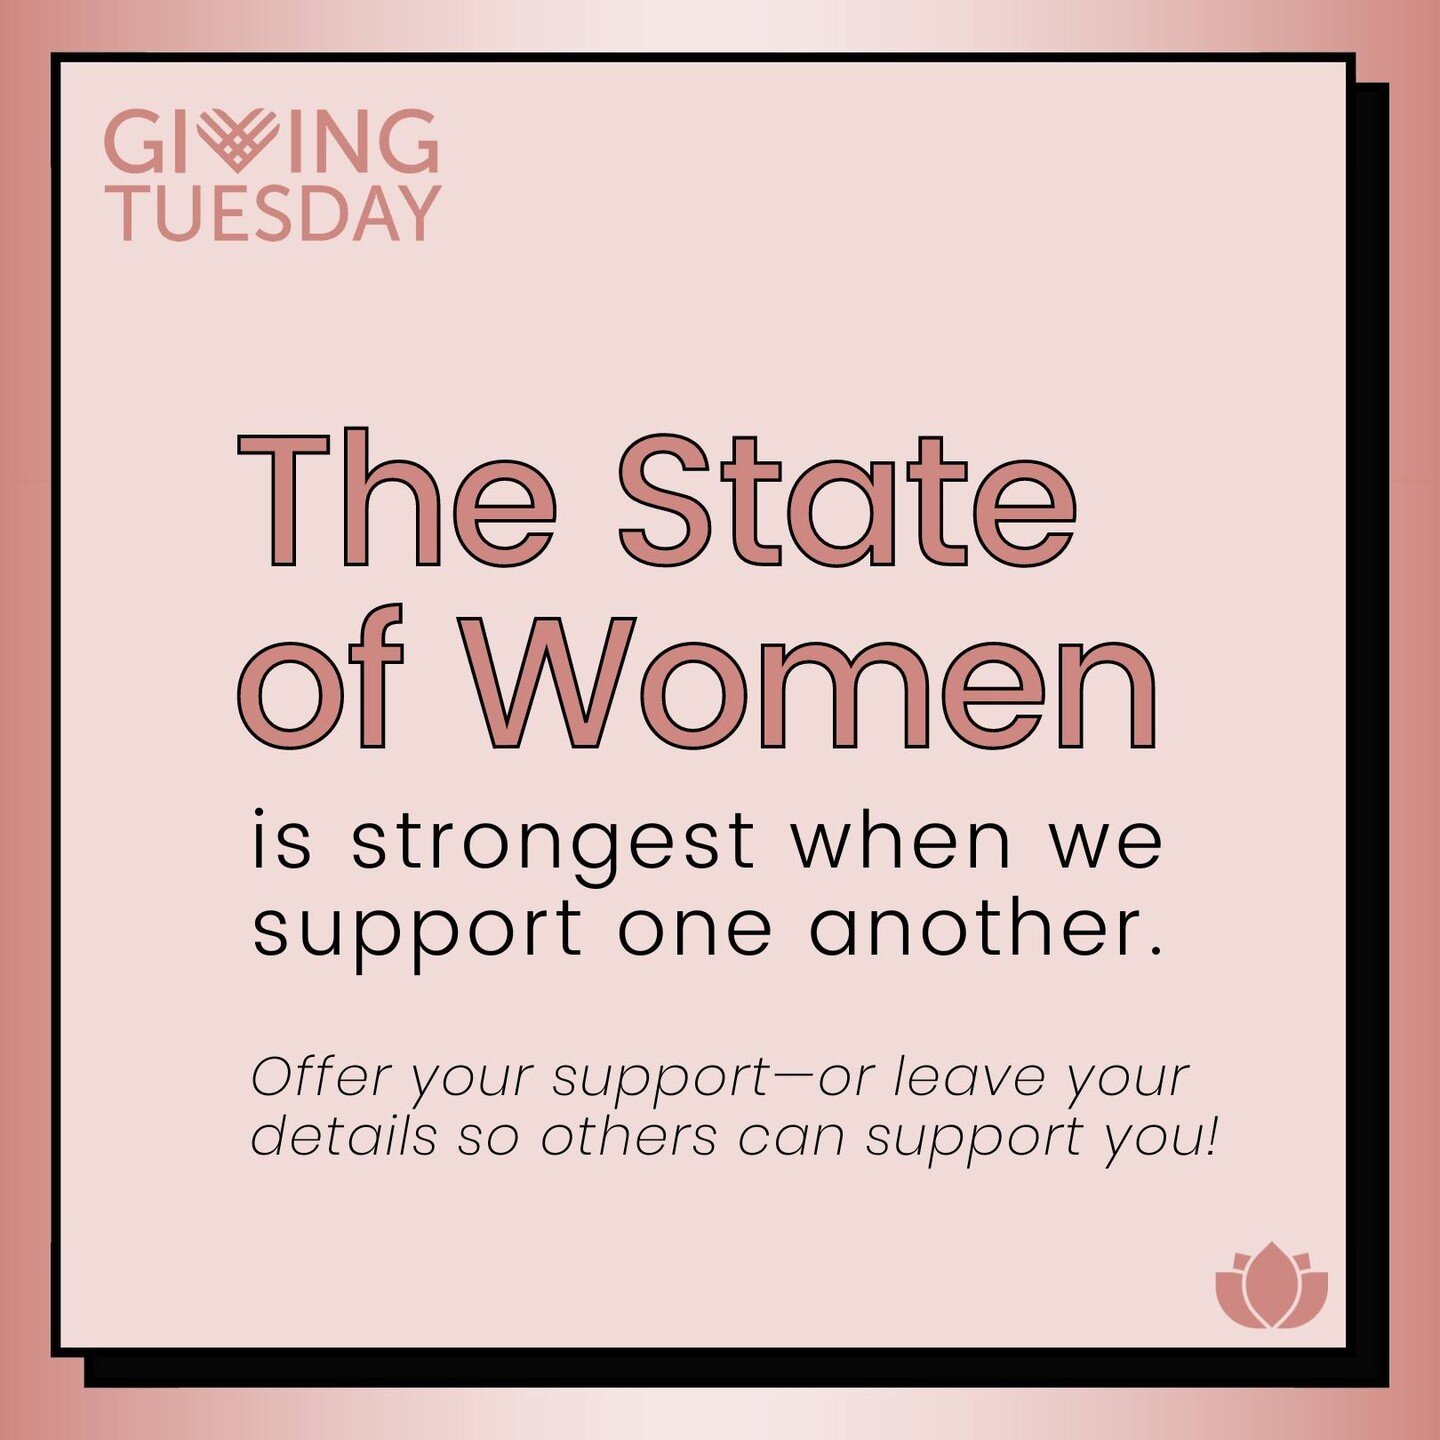 It's Giving Tuesday! At The State of Women, we're all about generosity, giving, and investing in women and other underrepresented groups. Today, tomorrow, and all year long: Thank you to everyone who gives money, time, and support to the causes that 